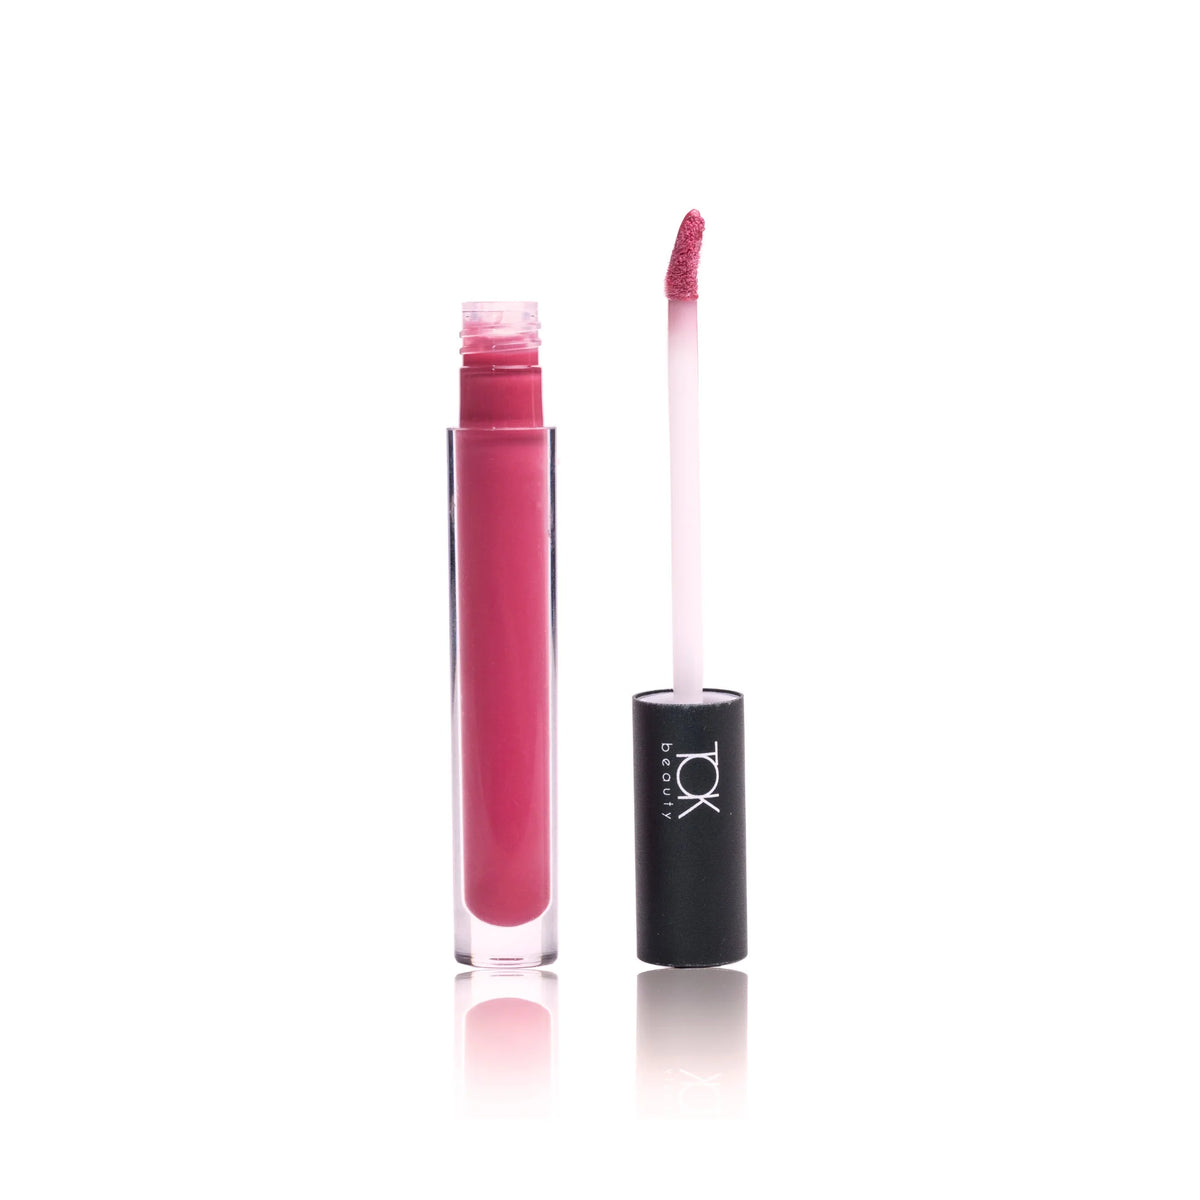 Tok beauty lip tonic in wild pink color with wand showing